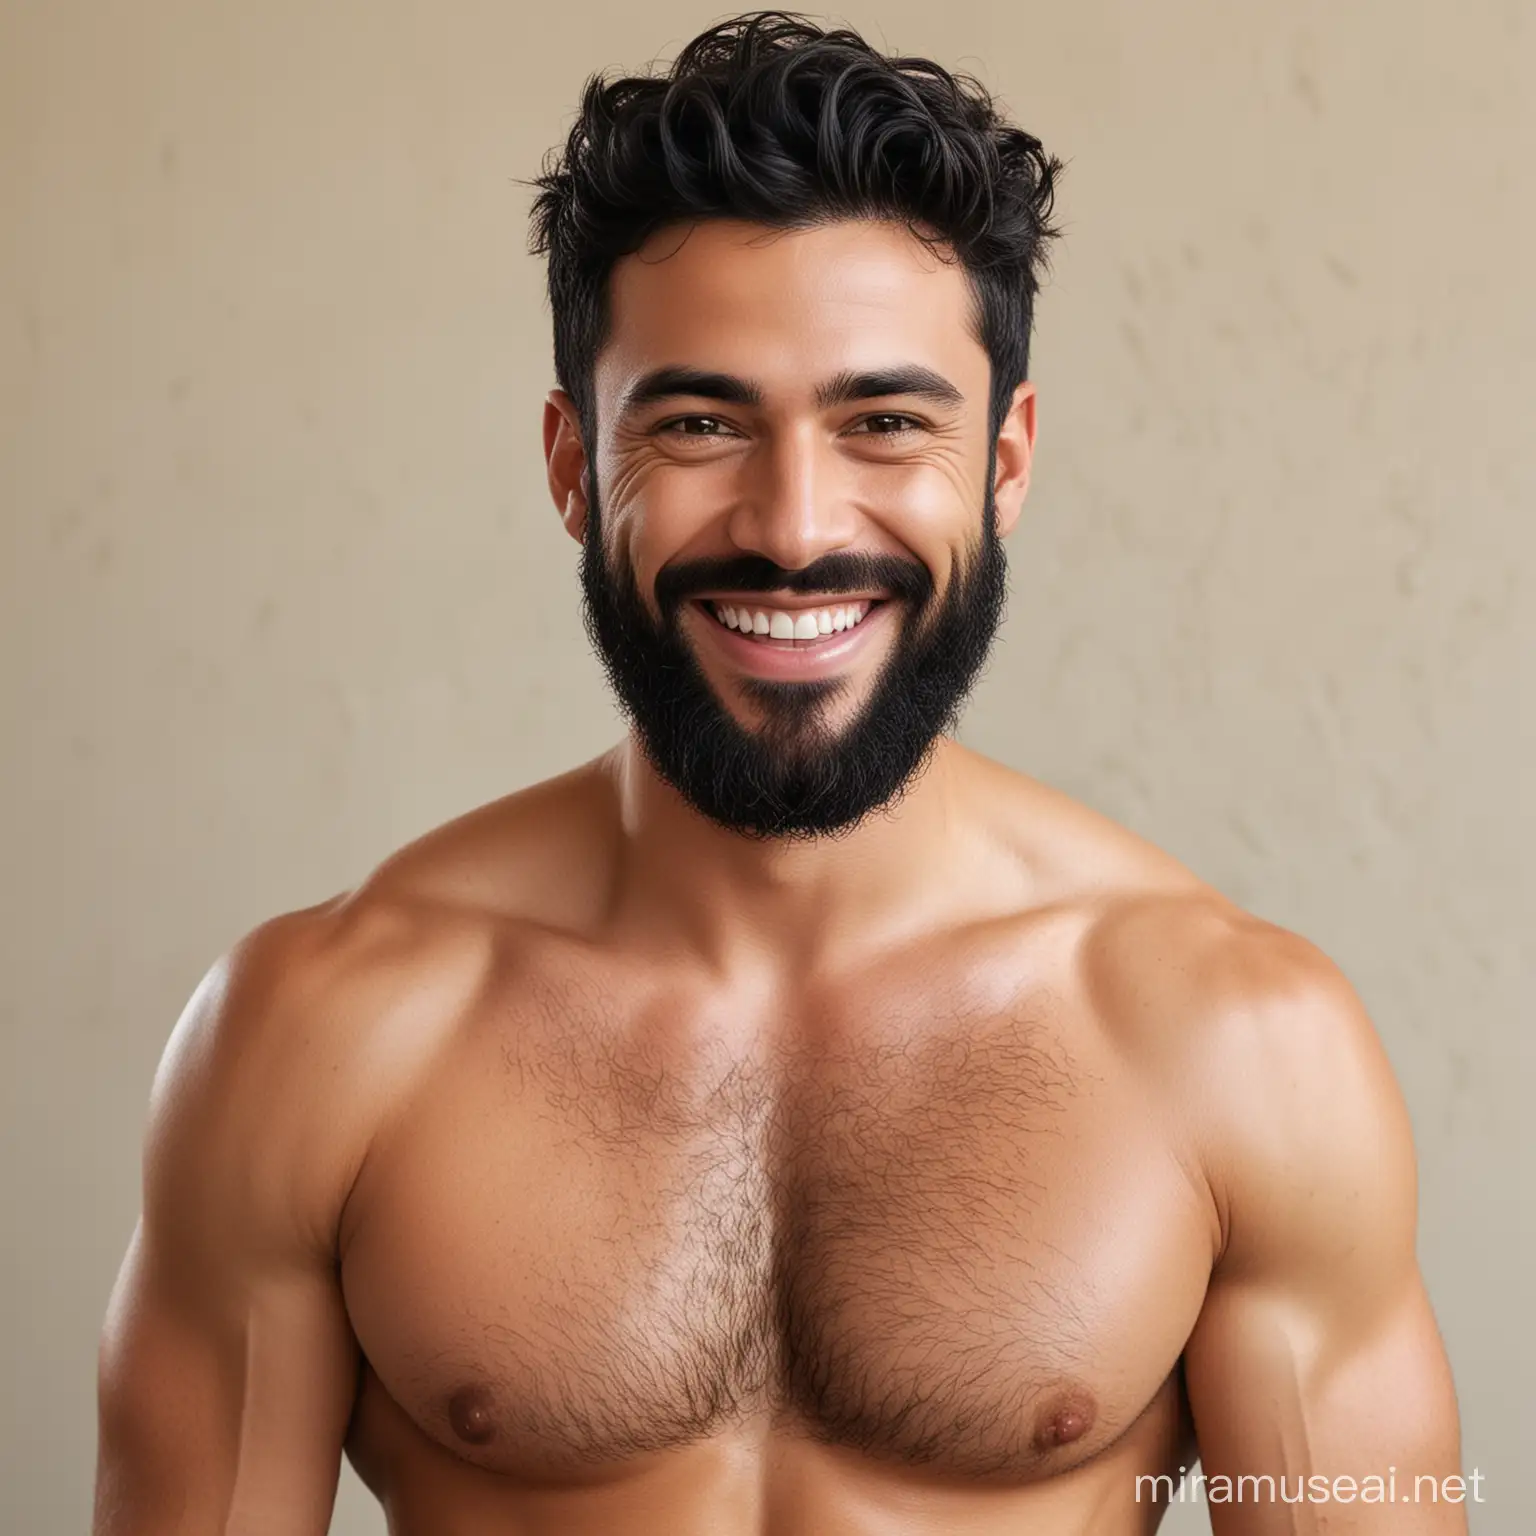 Smiling Athletic Man with Black Hair and Beard